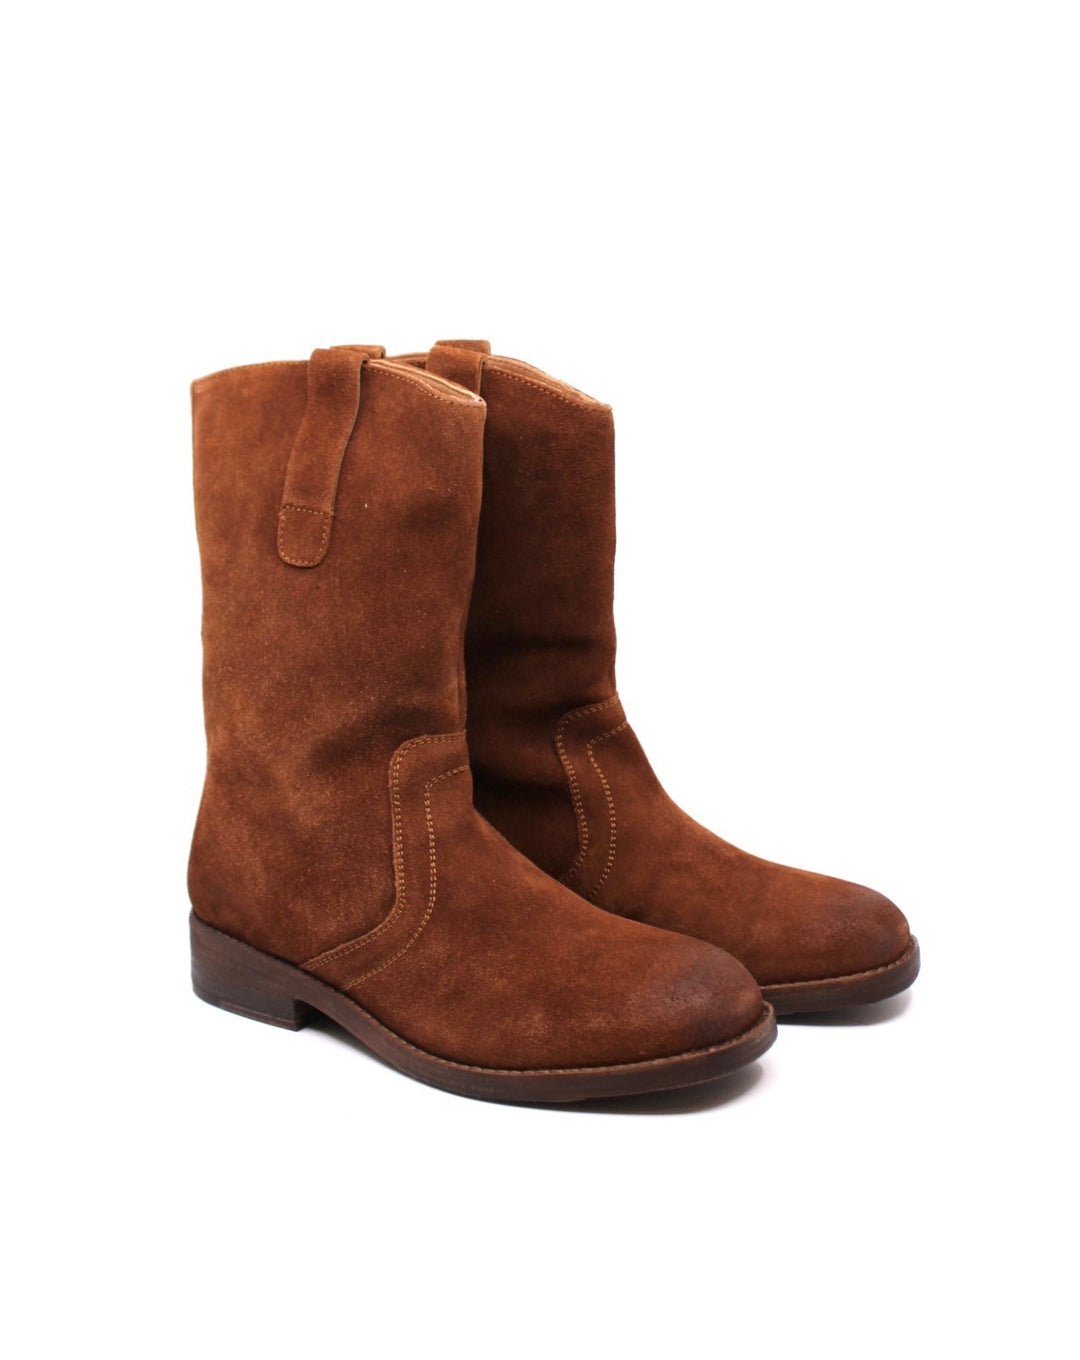 Free People Easton Equestrian Ankle Boot Saddle Suede - Dear Lucy